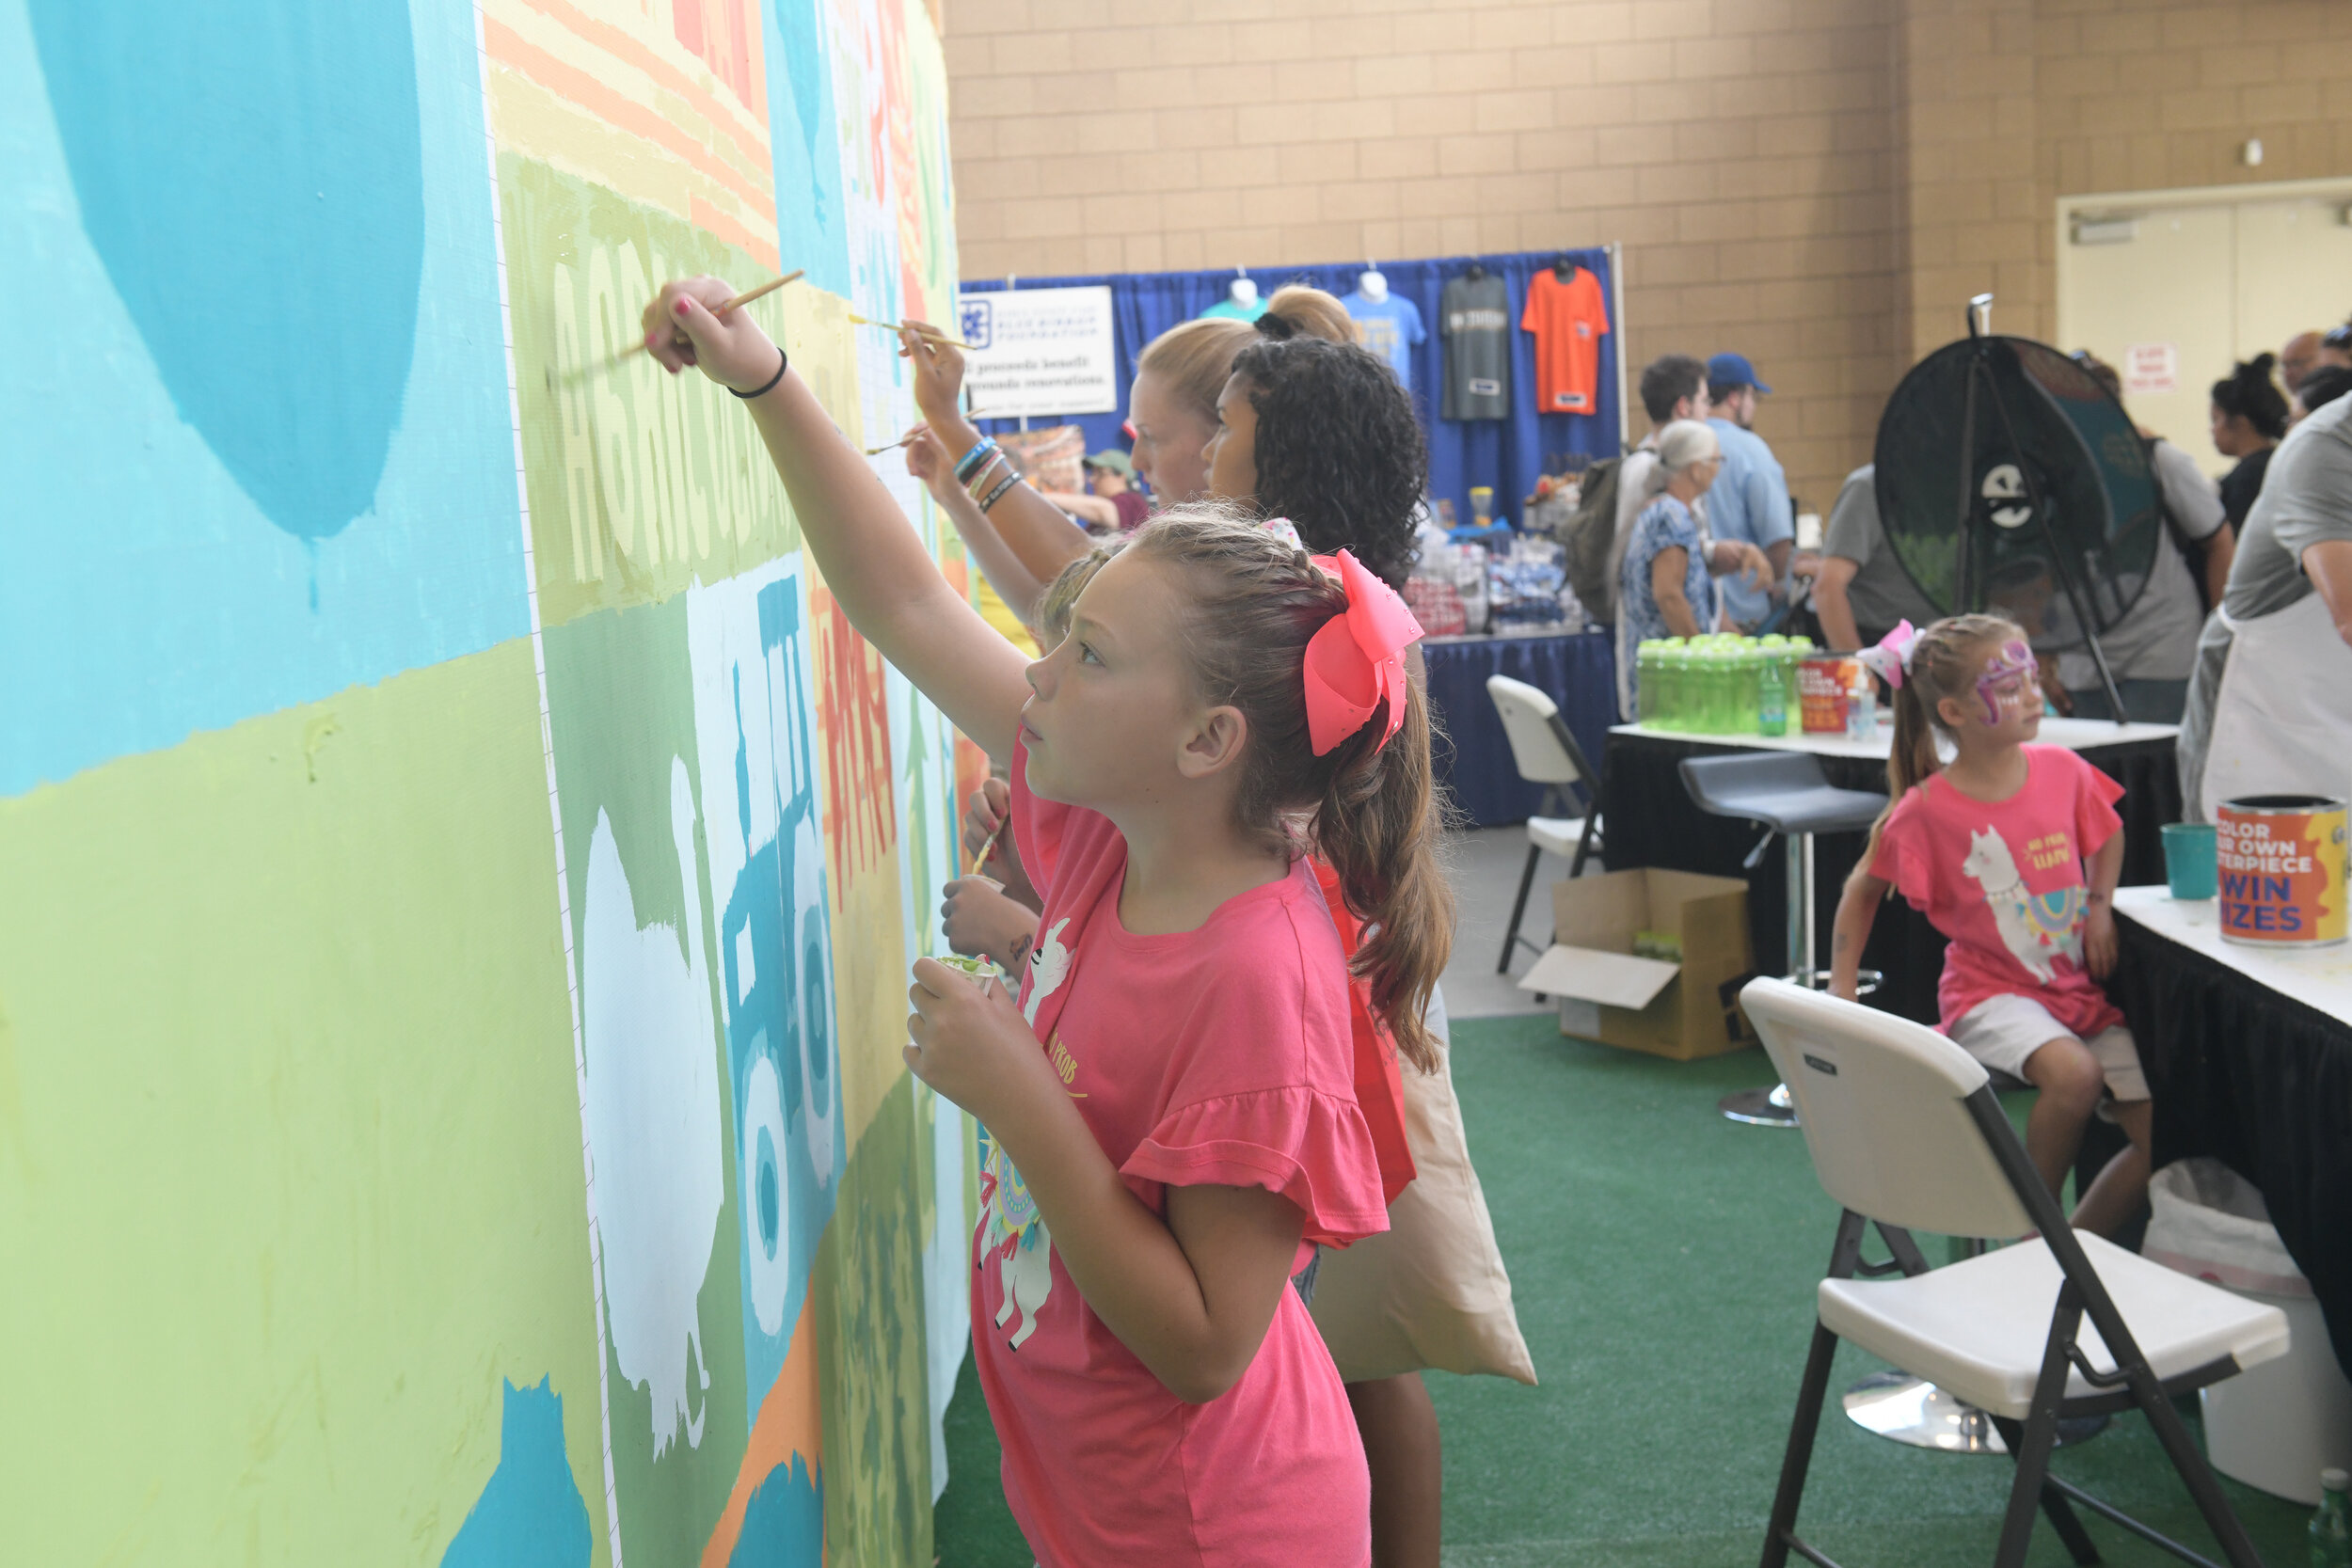 The 2019 fair display included a paint-by-number mural with more than 32,000 squares.